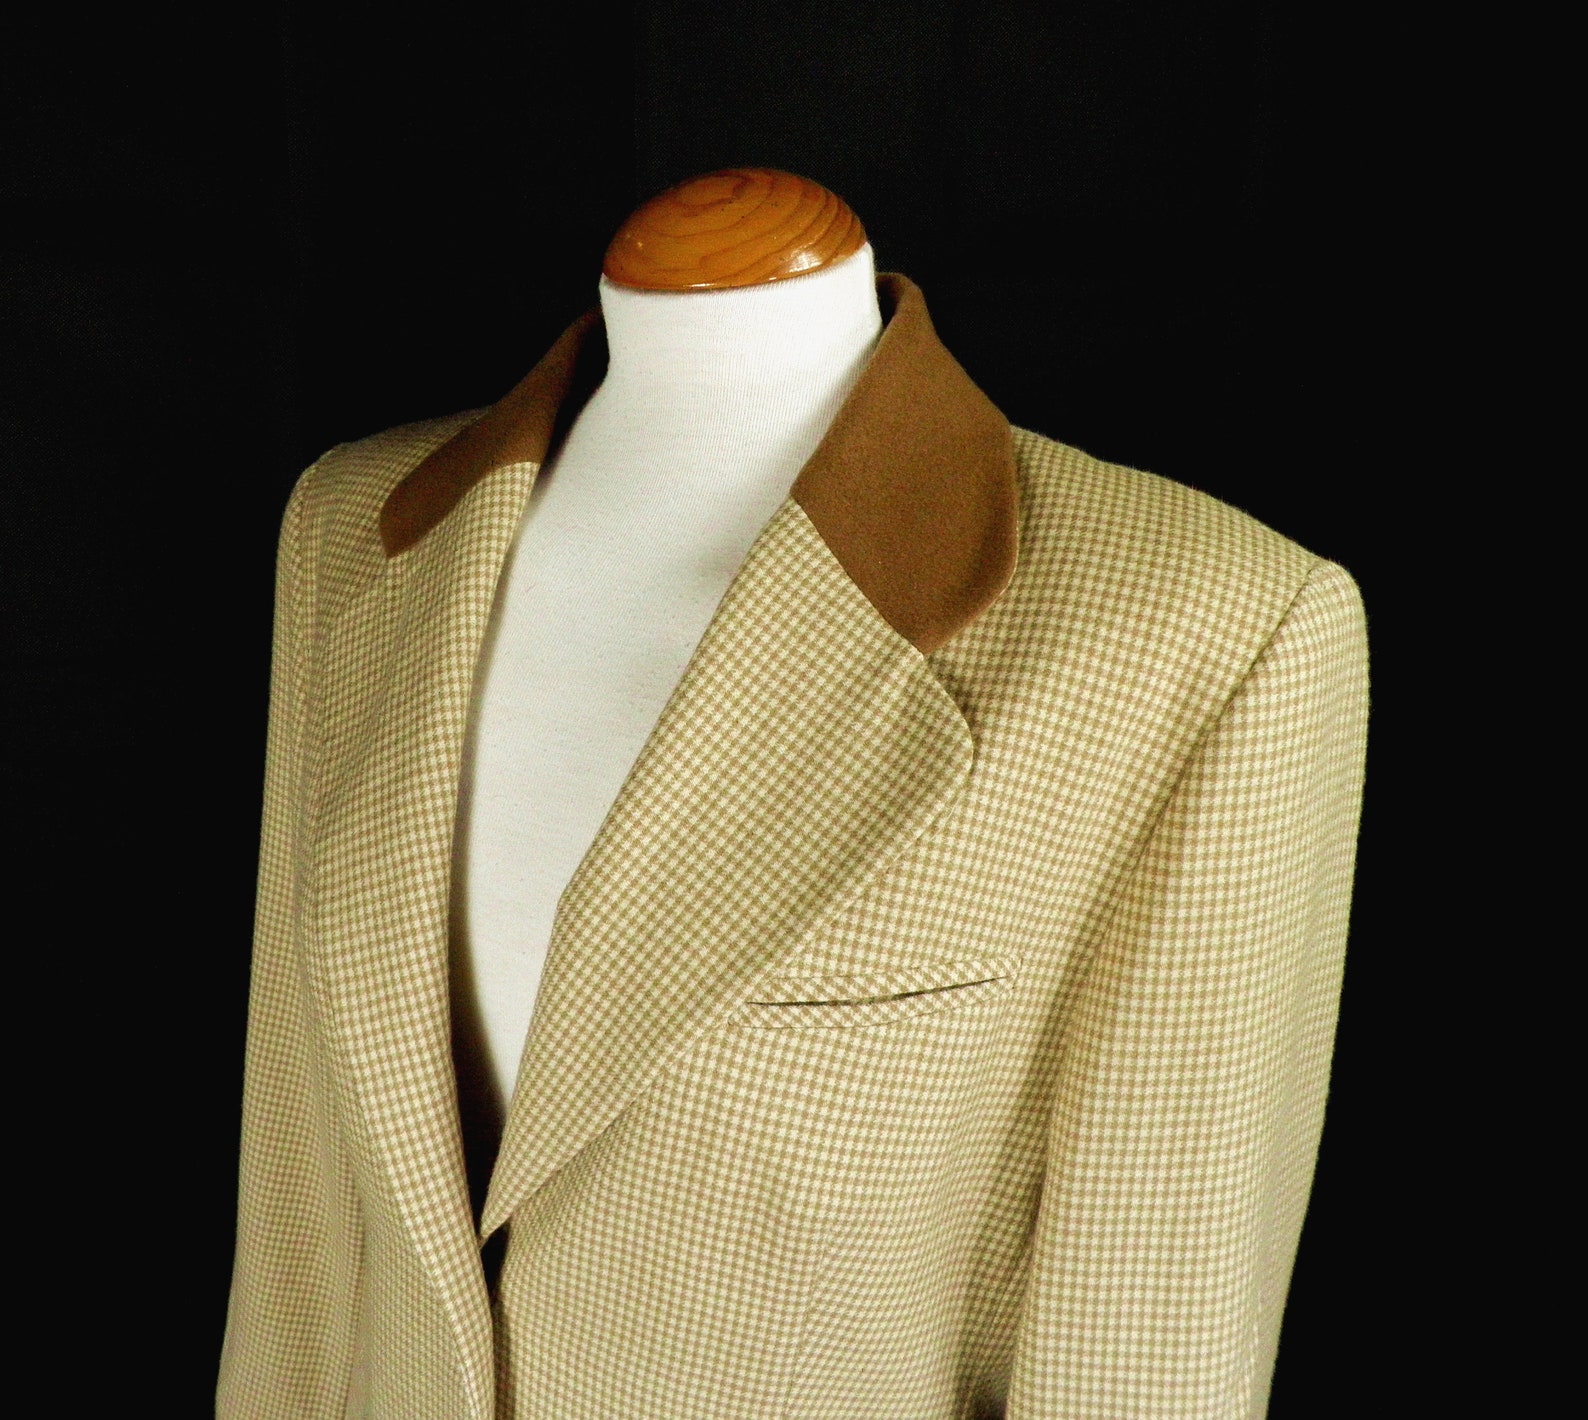 1980s Stylish Mustard and Cream Check Tweed Wool Tailored | Etsy